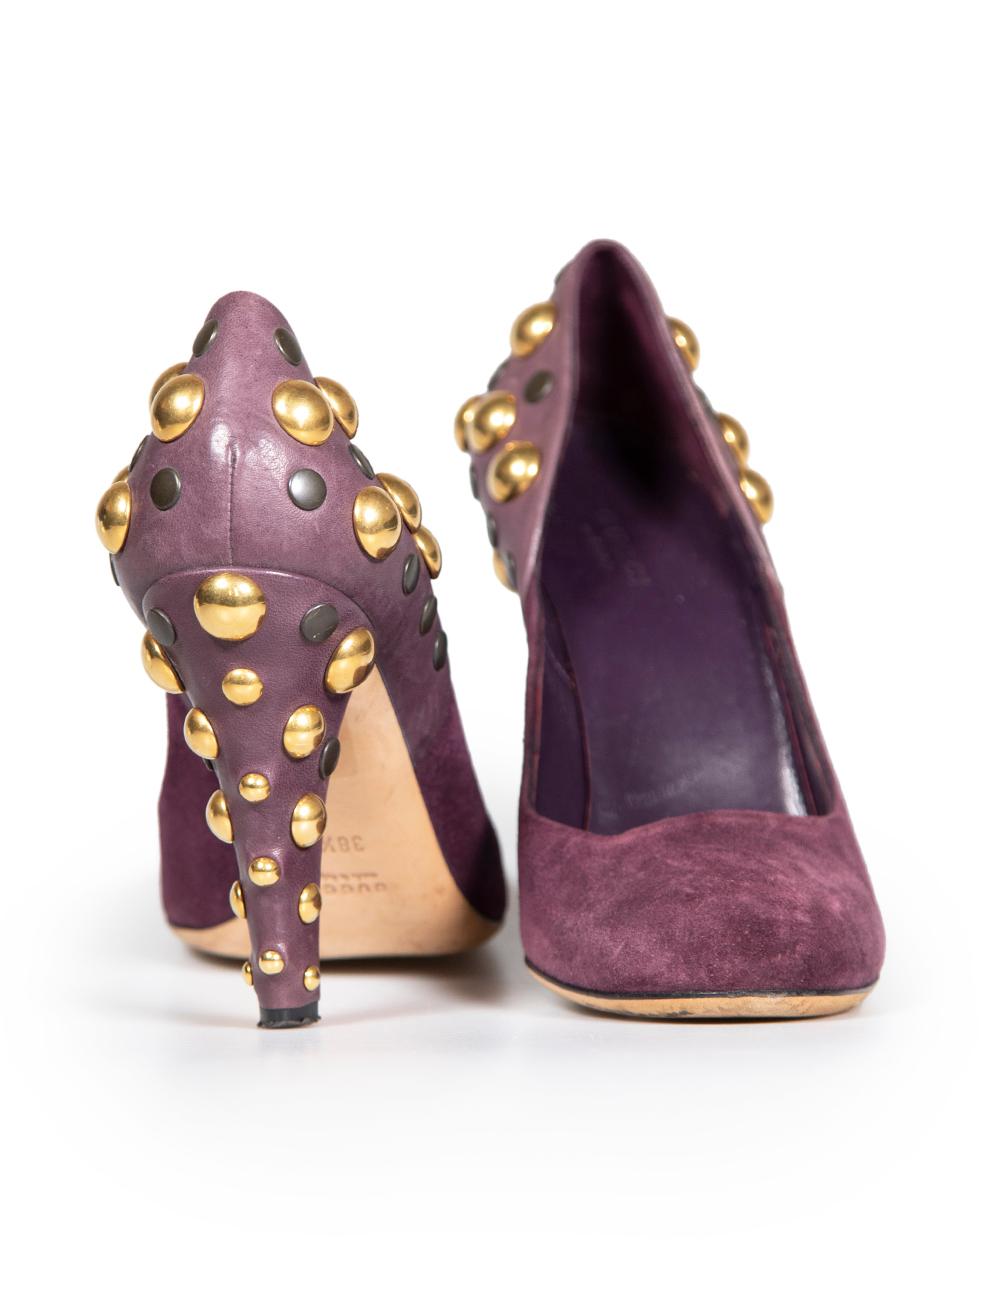 Gucci Purple Suede Studded Pumps Size IT 38.5 In Good Condition For Sale In London, GB